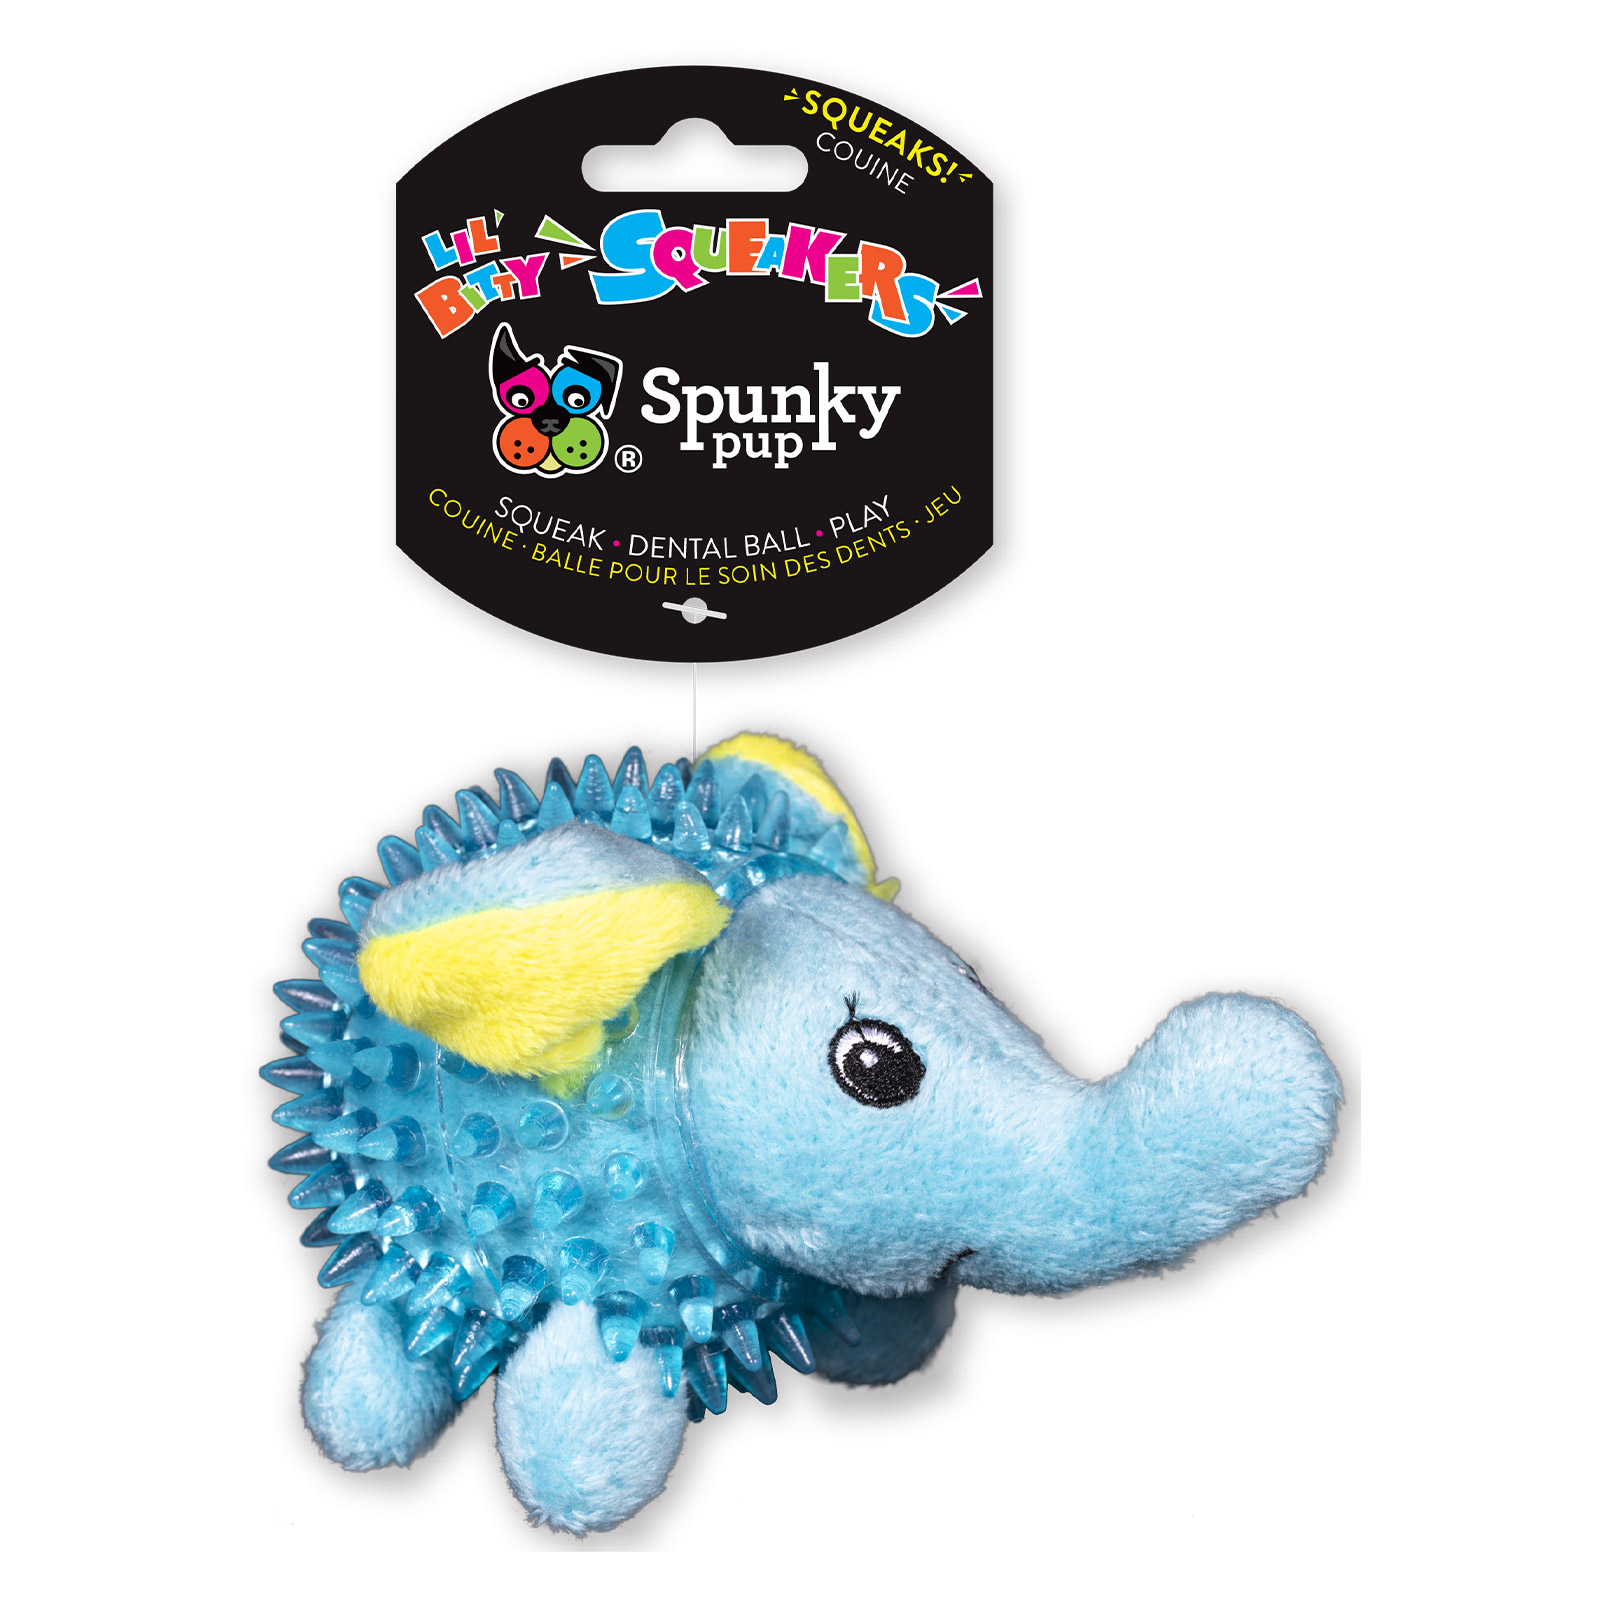 Spunky Pup Lil' Bitty Squeakers Elephant for Dogs